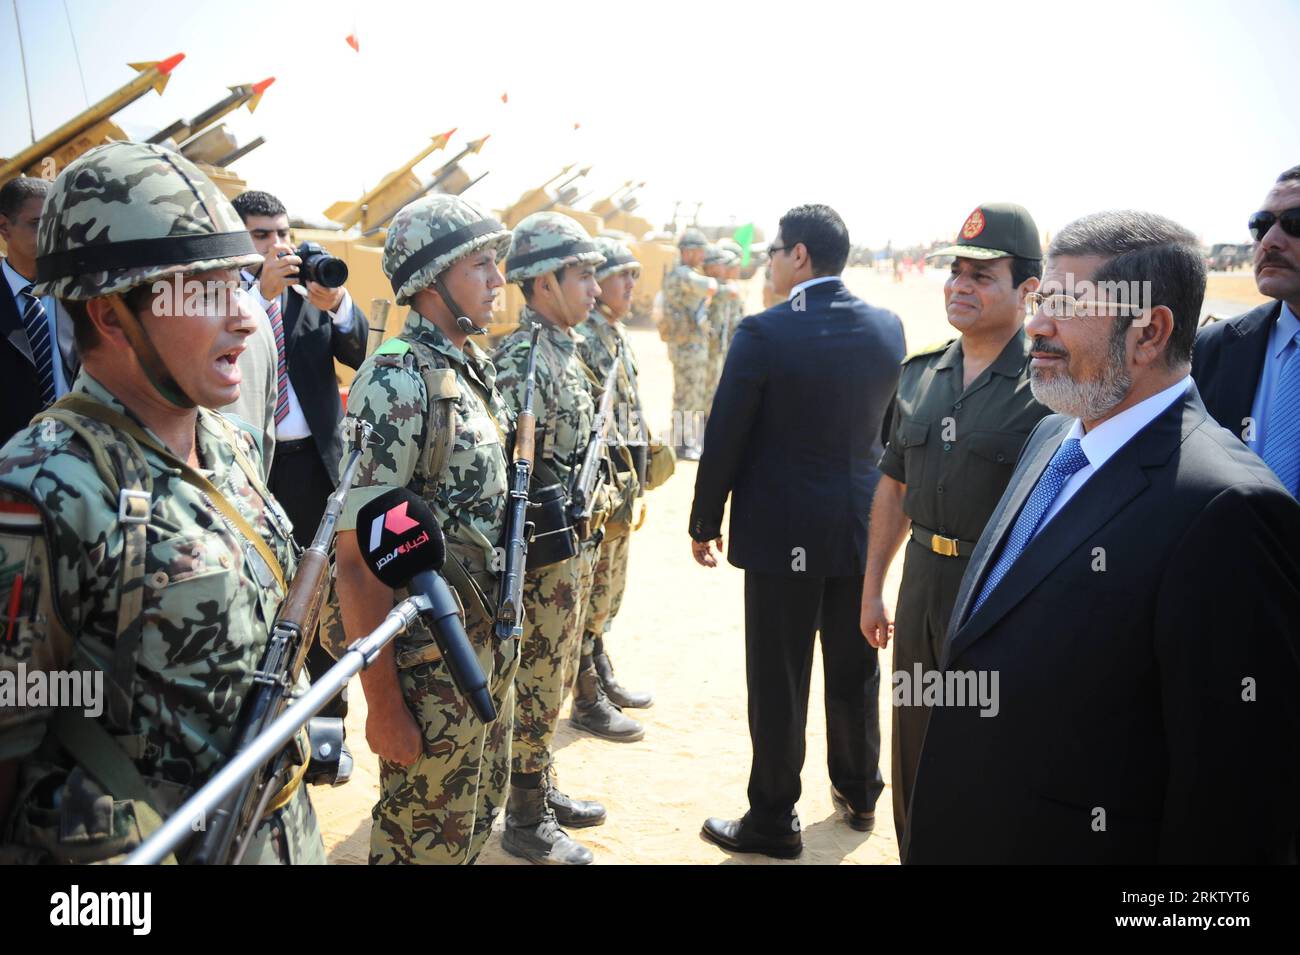 Bildnummer: 58574513  Datum: 10.10.2012  Copyright: imago/Xinhua (121010) -- CAIRO, Oct. 10, 2012 (Xinhua) -- Egyptian President and Supreme Commander of the Armed Forces Mohamed Morsi (R) inspects the 6th Armored Division of the Second Army at Wadi Malak in Ismailia on the occasion of Egypt s celebrations of the October War Victory anniversary, Oct. 10, 2012. (Xinhua/Egyptian Presidency)(cl) EGYPT-ISMAILIA-MORSI-INSPECTION PUBLICATIONxNOTxINxCHN People Politik premiumd x0x xsk 2012 quer      58574513 Date 10 10 2012 Copyright Imago XINHUA 121010 Cairo OCT 10 2012 XINHUA Egyptian President and Stock Photo